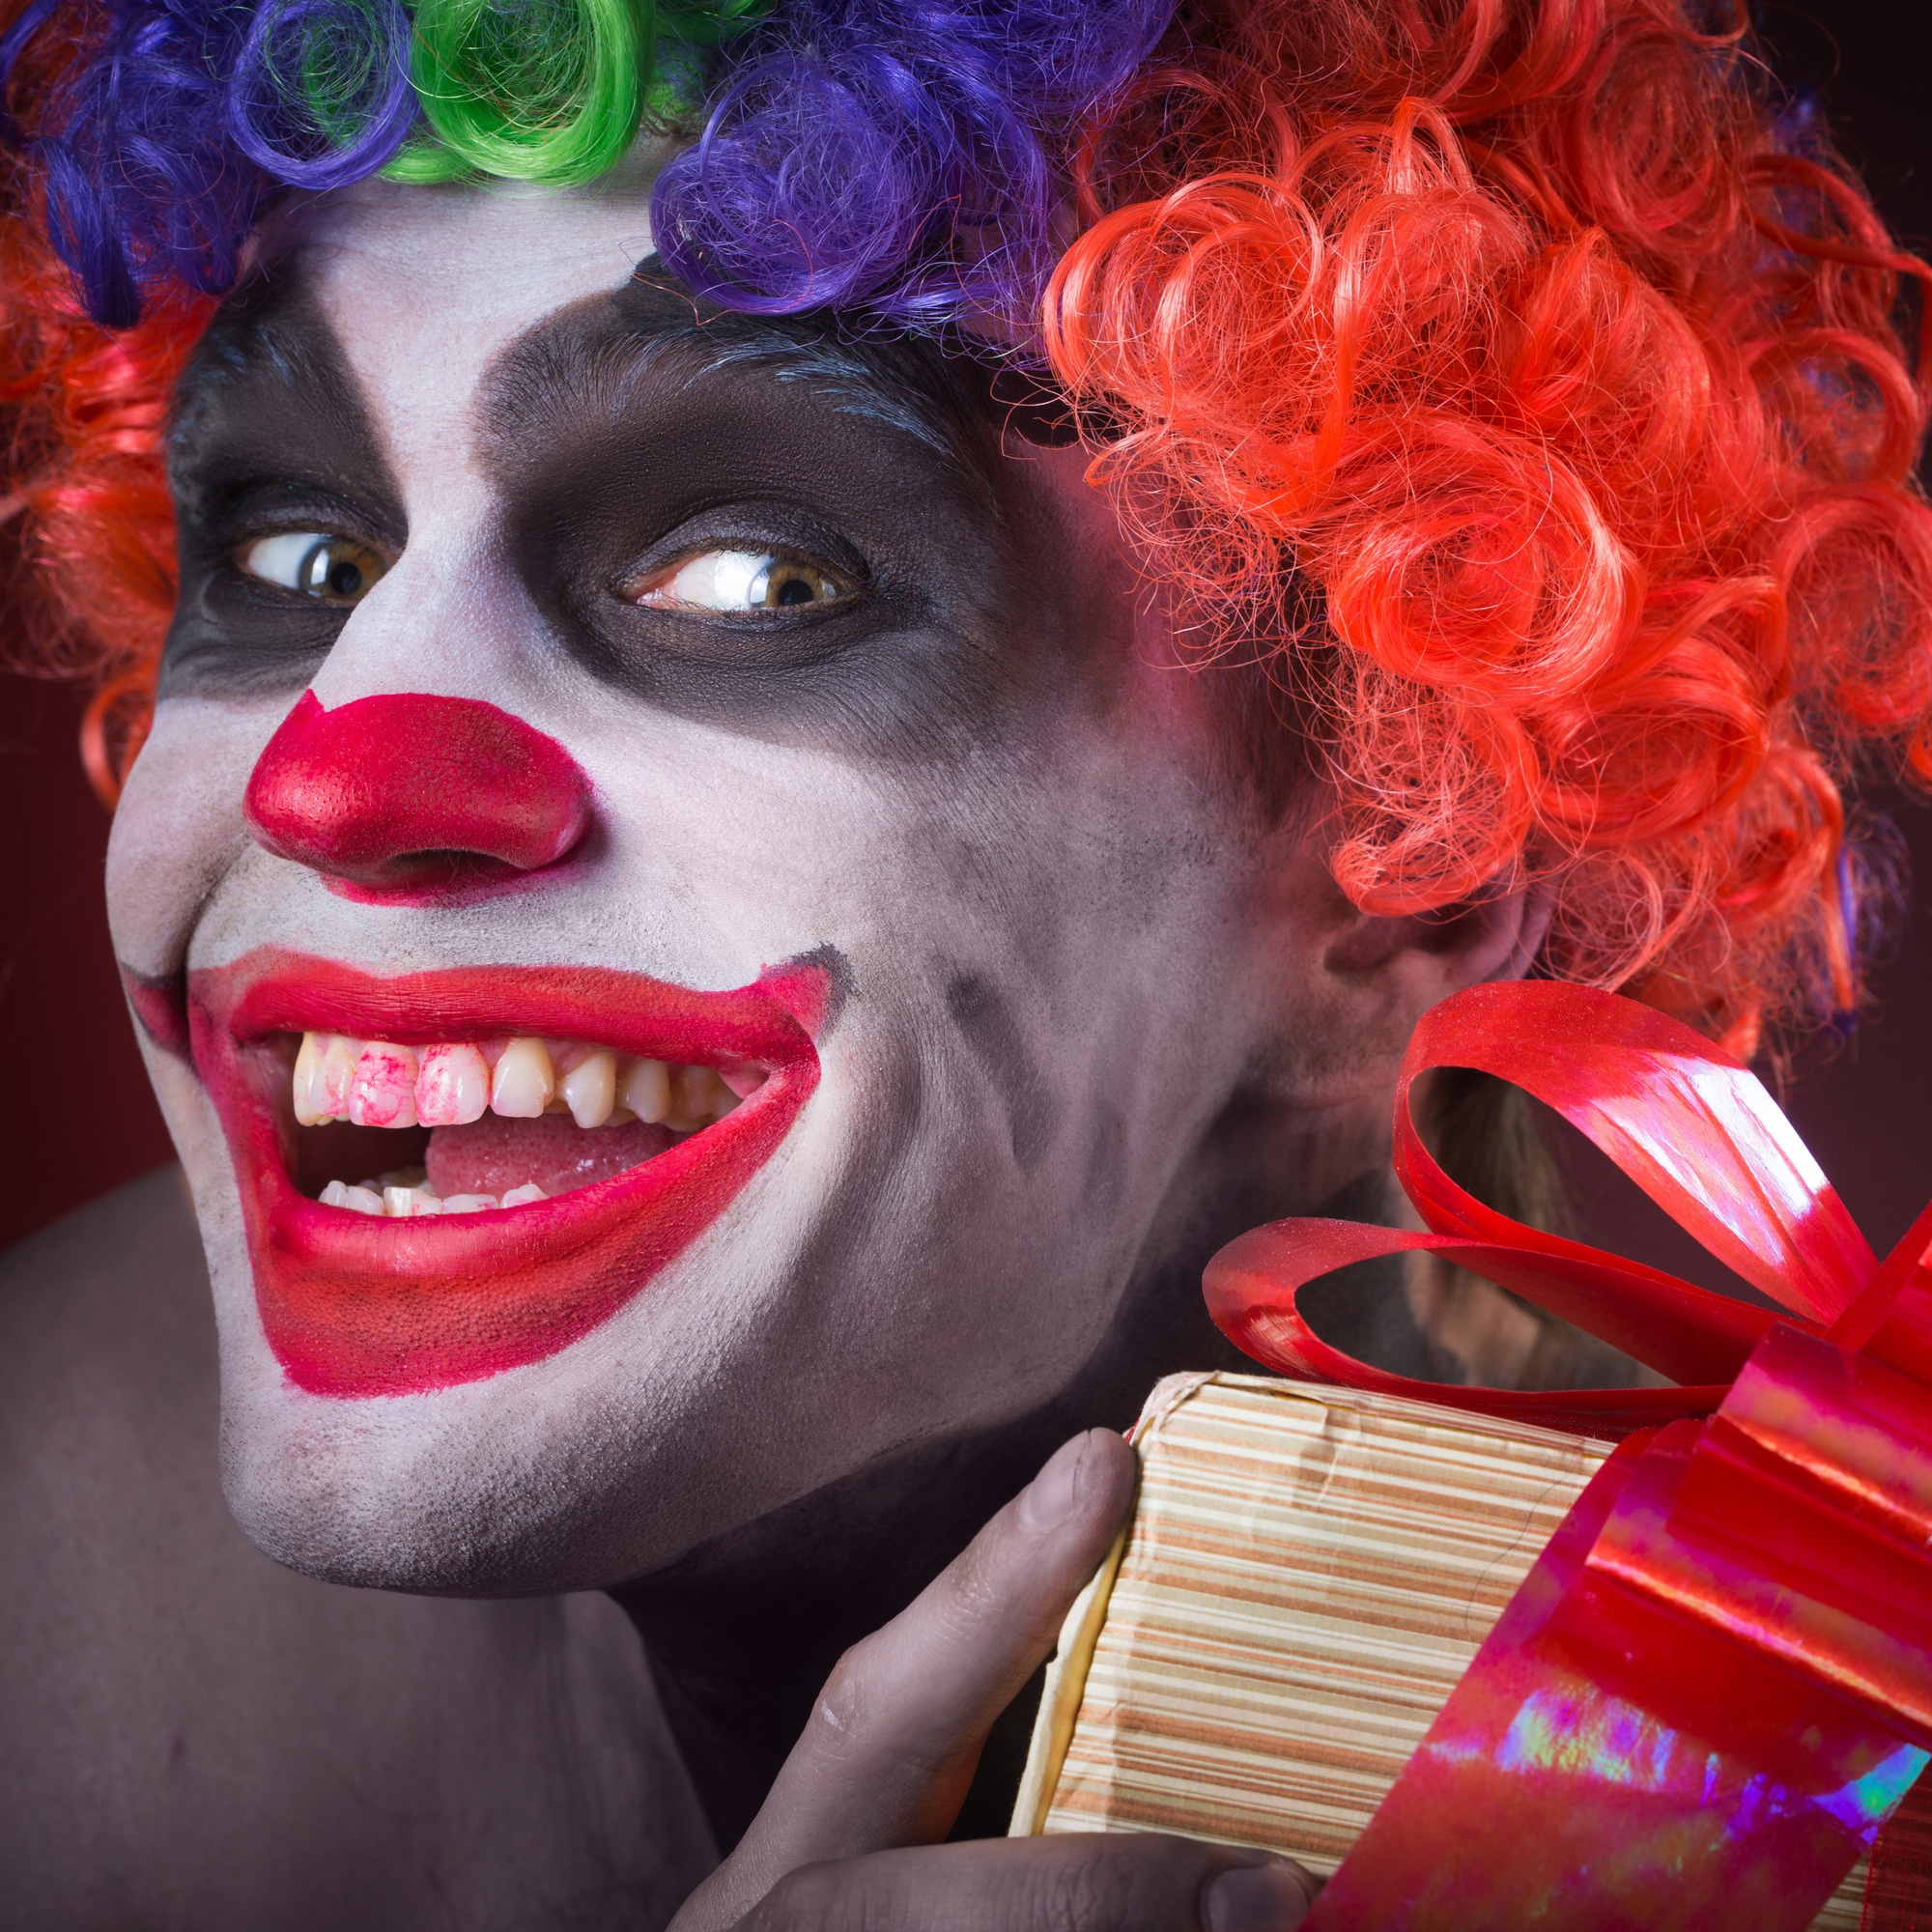 photodune-13177274-scary-clown-makeup-and-with-a-terrible-gift-l-square.jpg